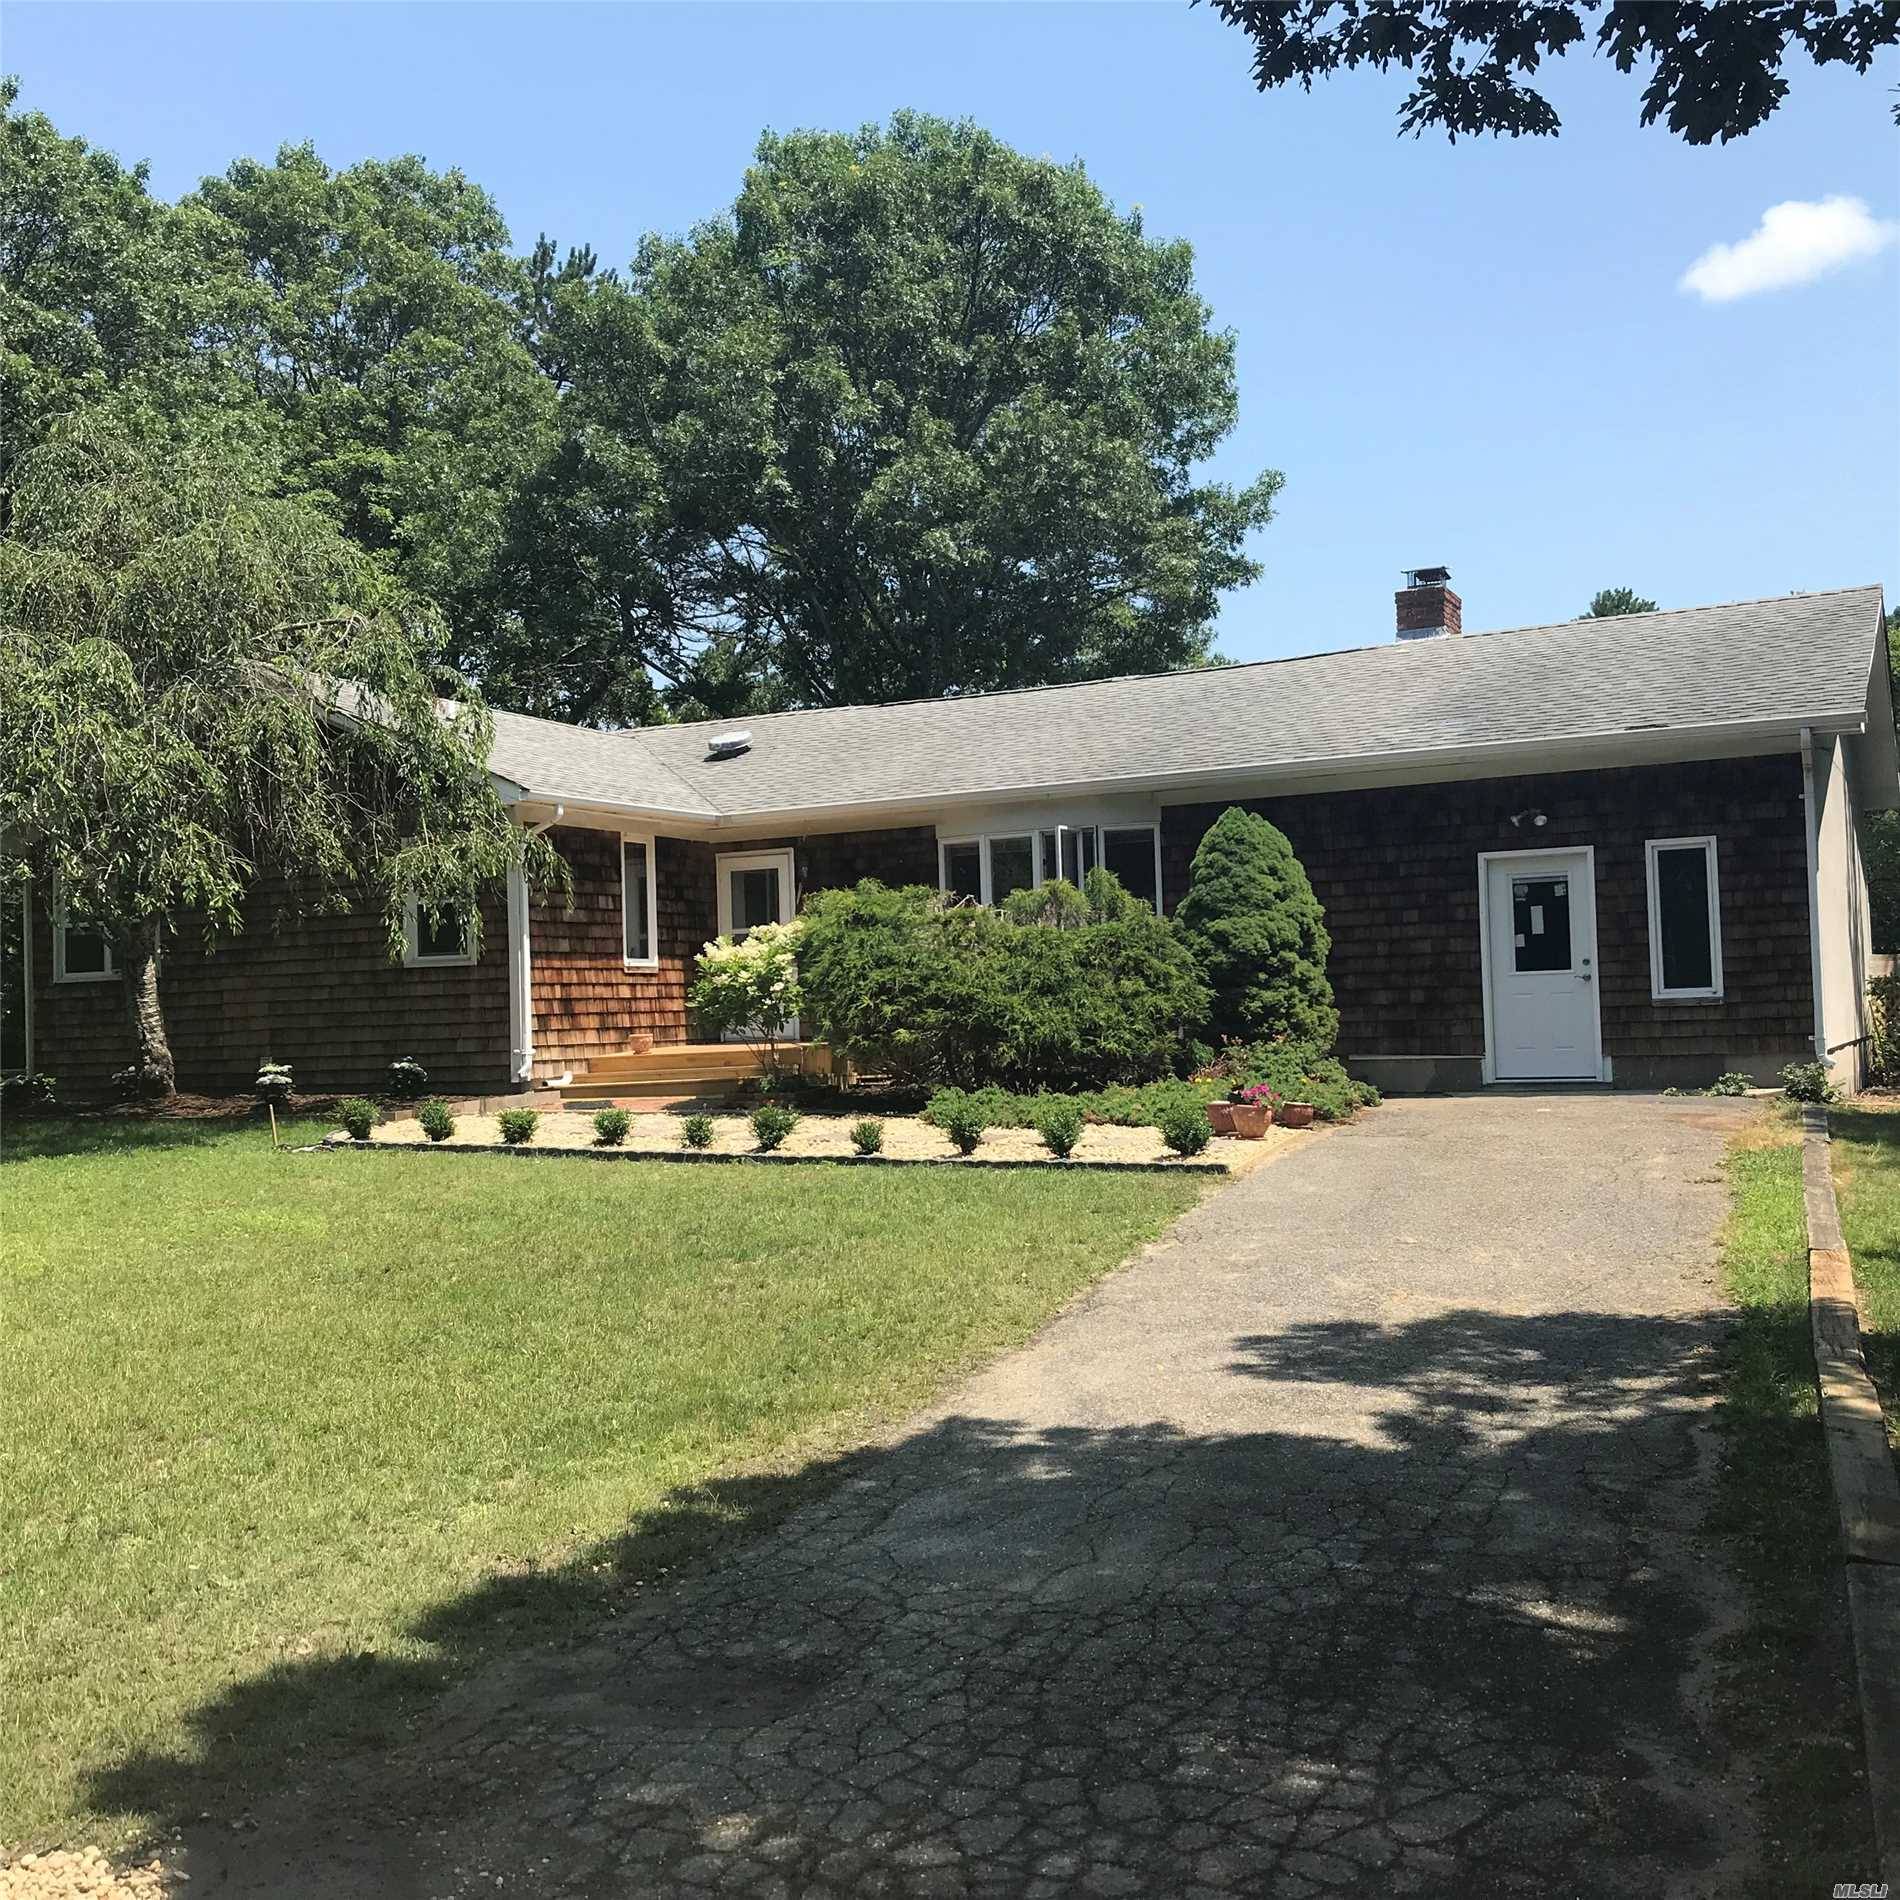 The Best Value In East Quogue Offers A Cathedral Great Room, Brick Floor To Ceiling Fireplace, New Kitchen Cabinets, Counters, Sink, And All New Stainless Steel Appliances.